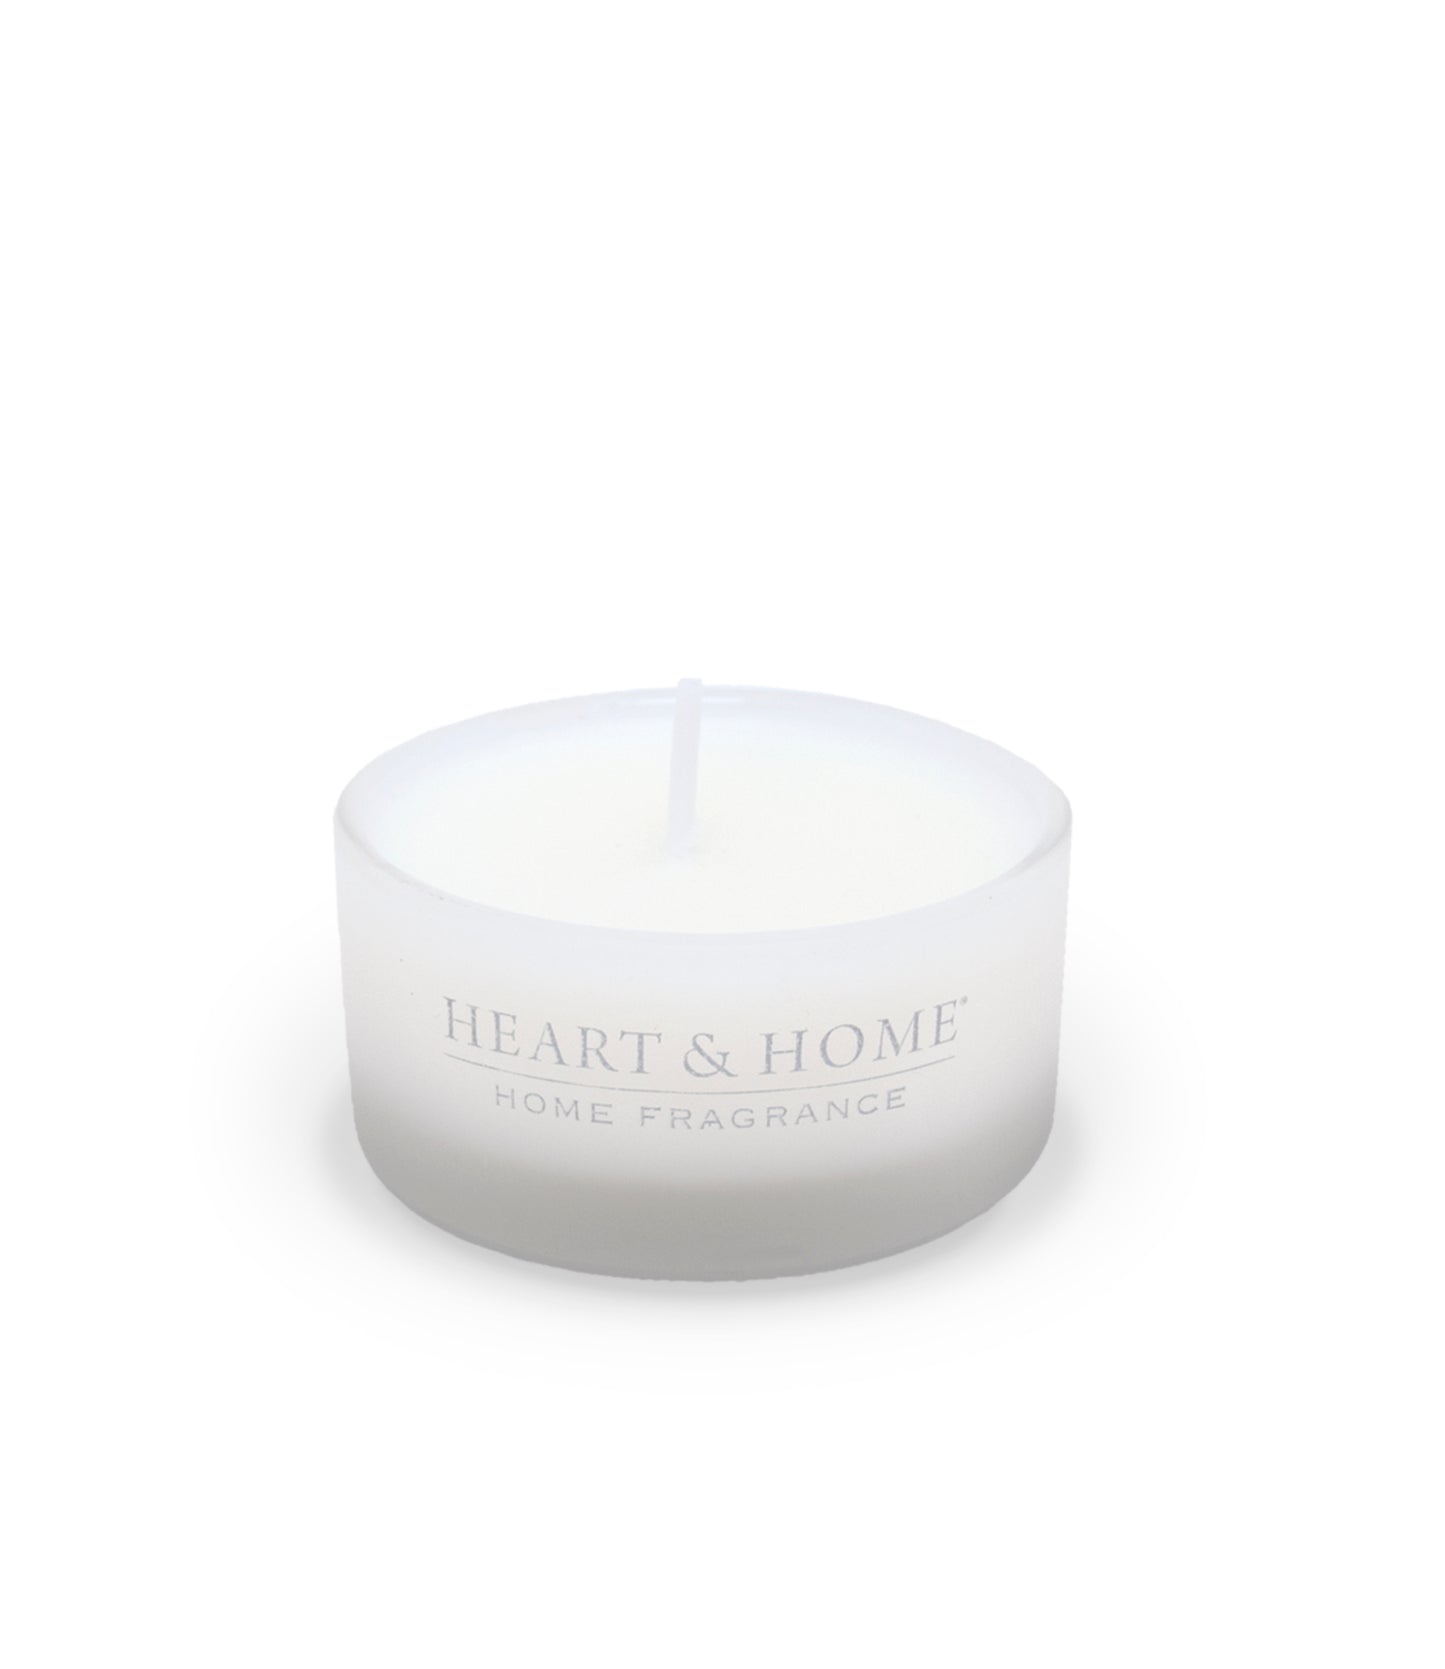 Heart & Home White Jasmine & Freesia Scented Soy Wax Scent Cup